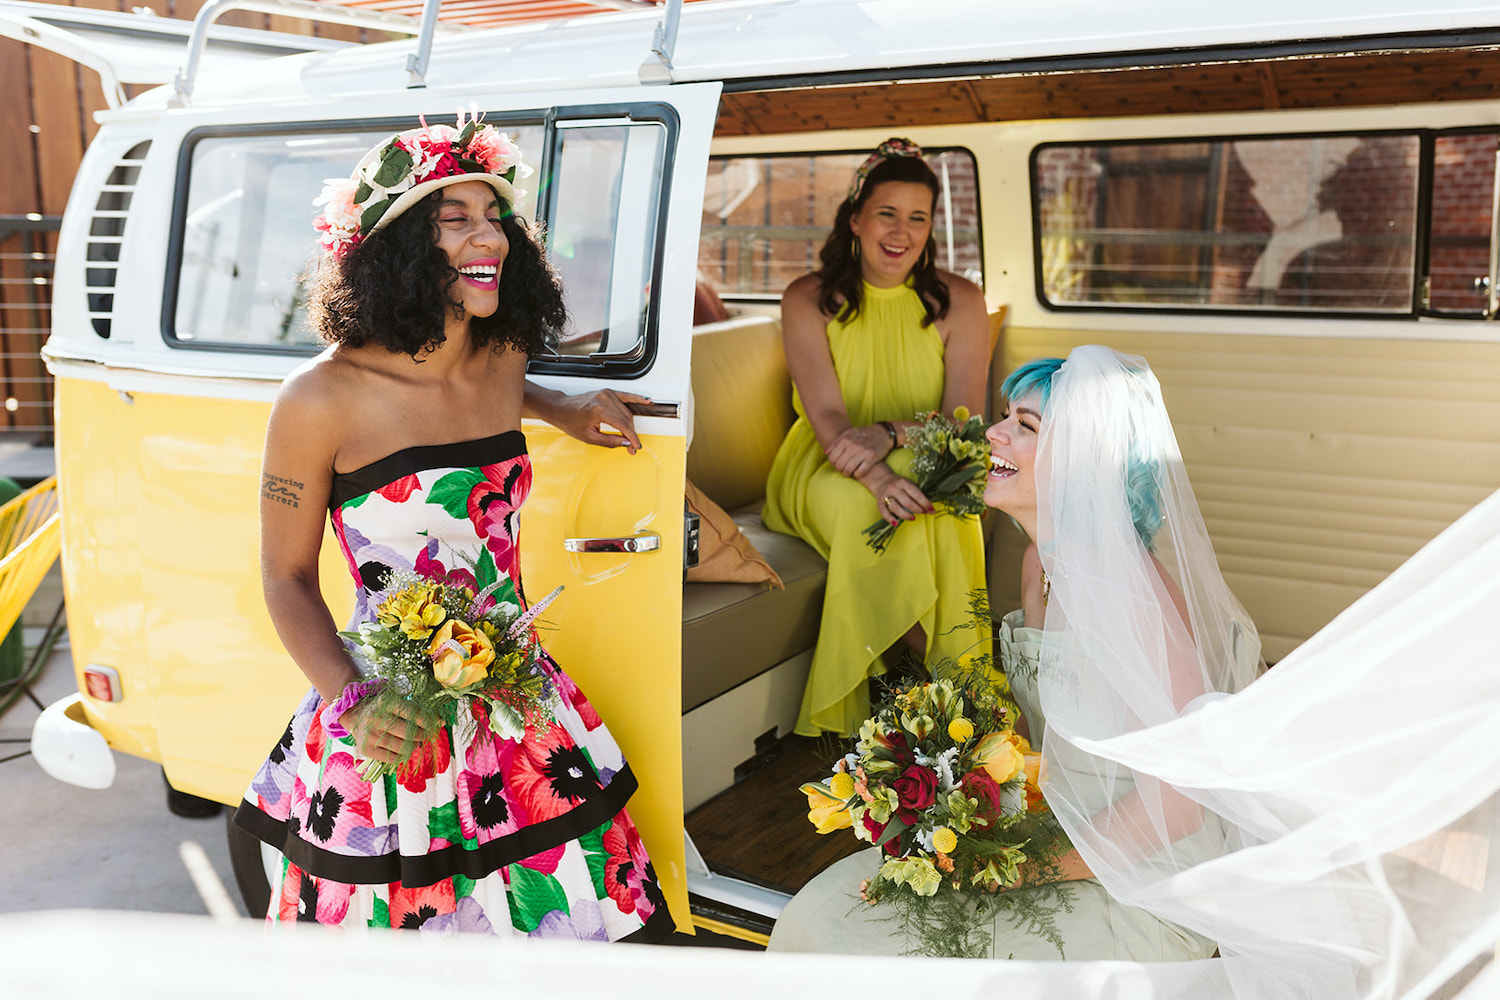 bride with blue hair laughs with woman in yellow dress and woman in bright floral dress and hat